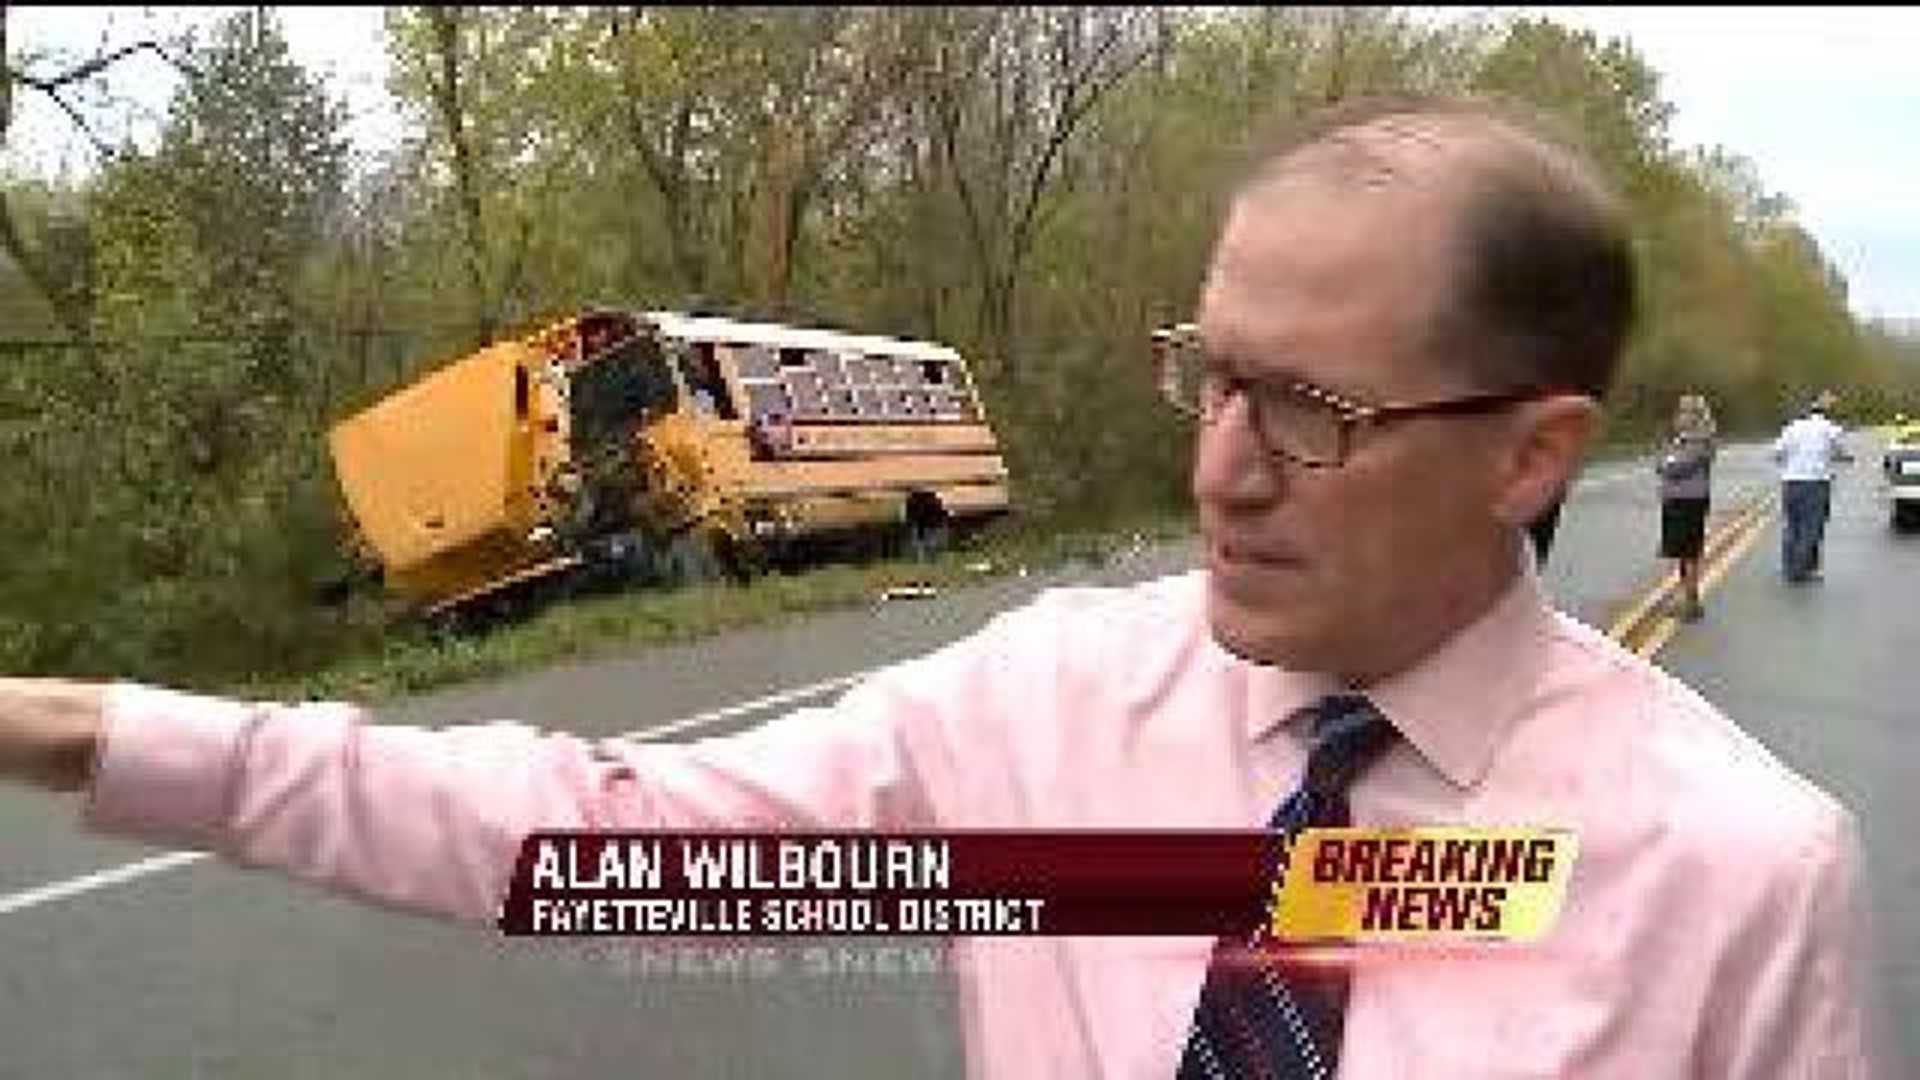 Truck and bus collide